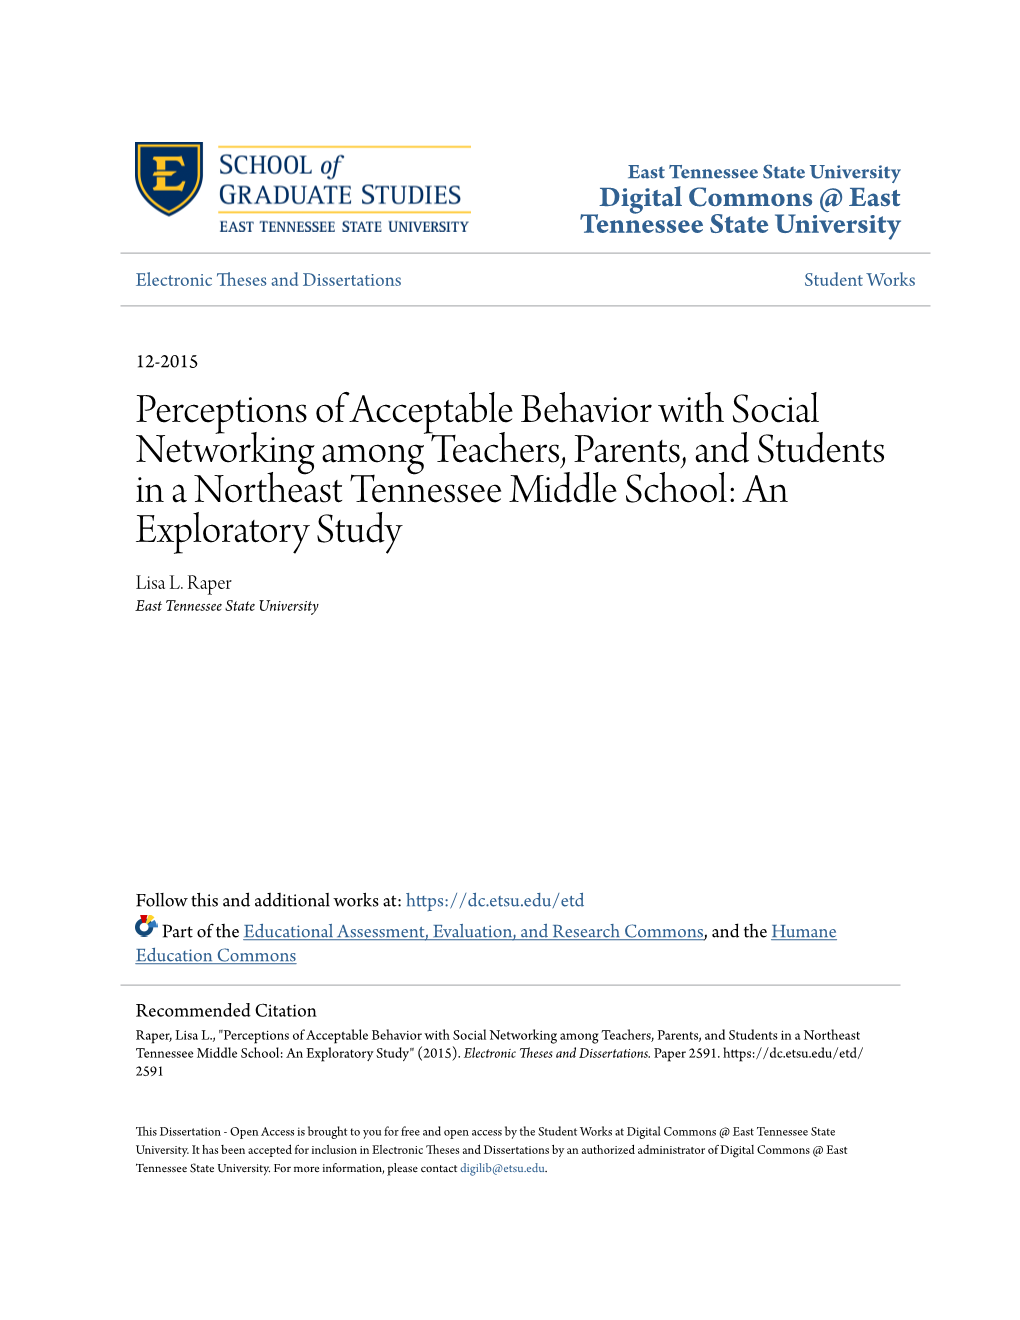 Perceptions of Acceptable Behavior with Social Networking Among Teachers, Parents, and Students in a Northeast Tennessee Middle School: an Exploratory Study Lisa L